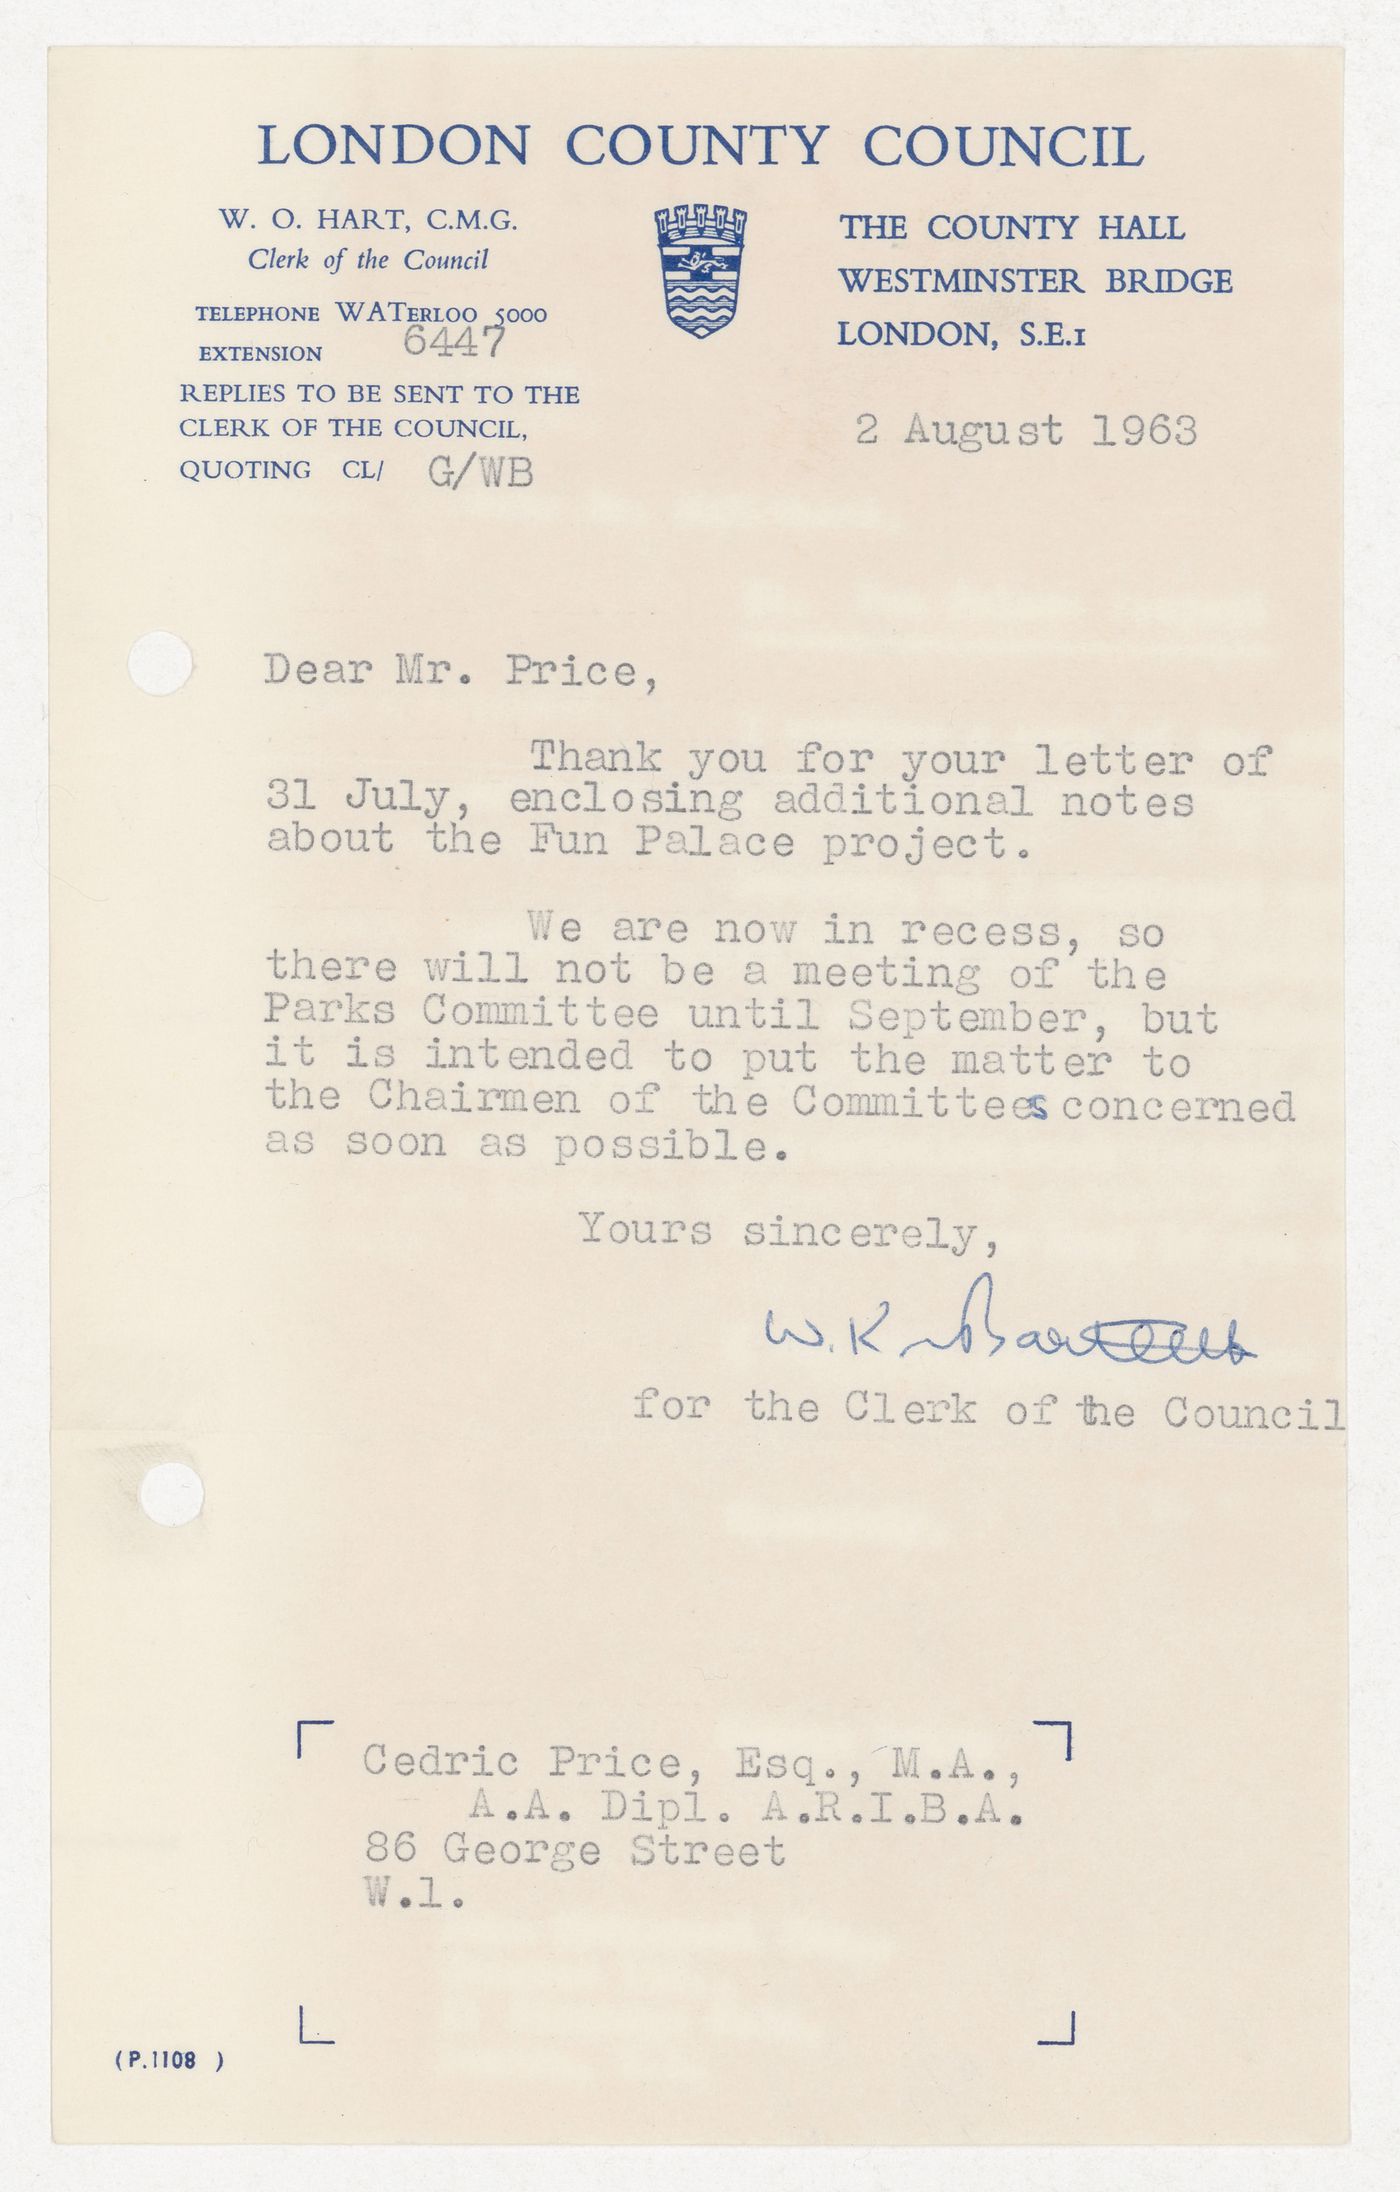 Letter from the Clerk of the London County Council to Cedric Price regarding the Fun Palace Project